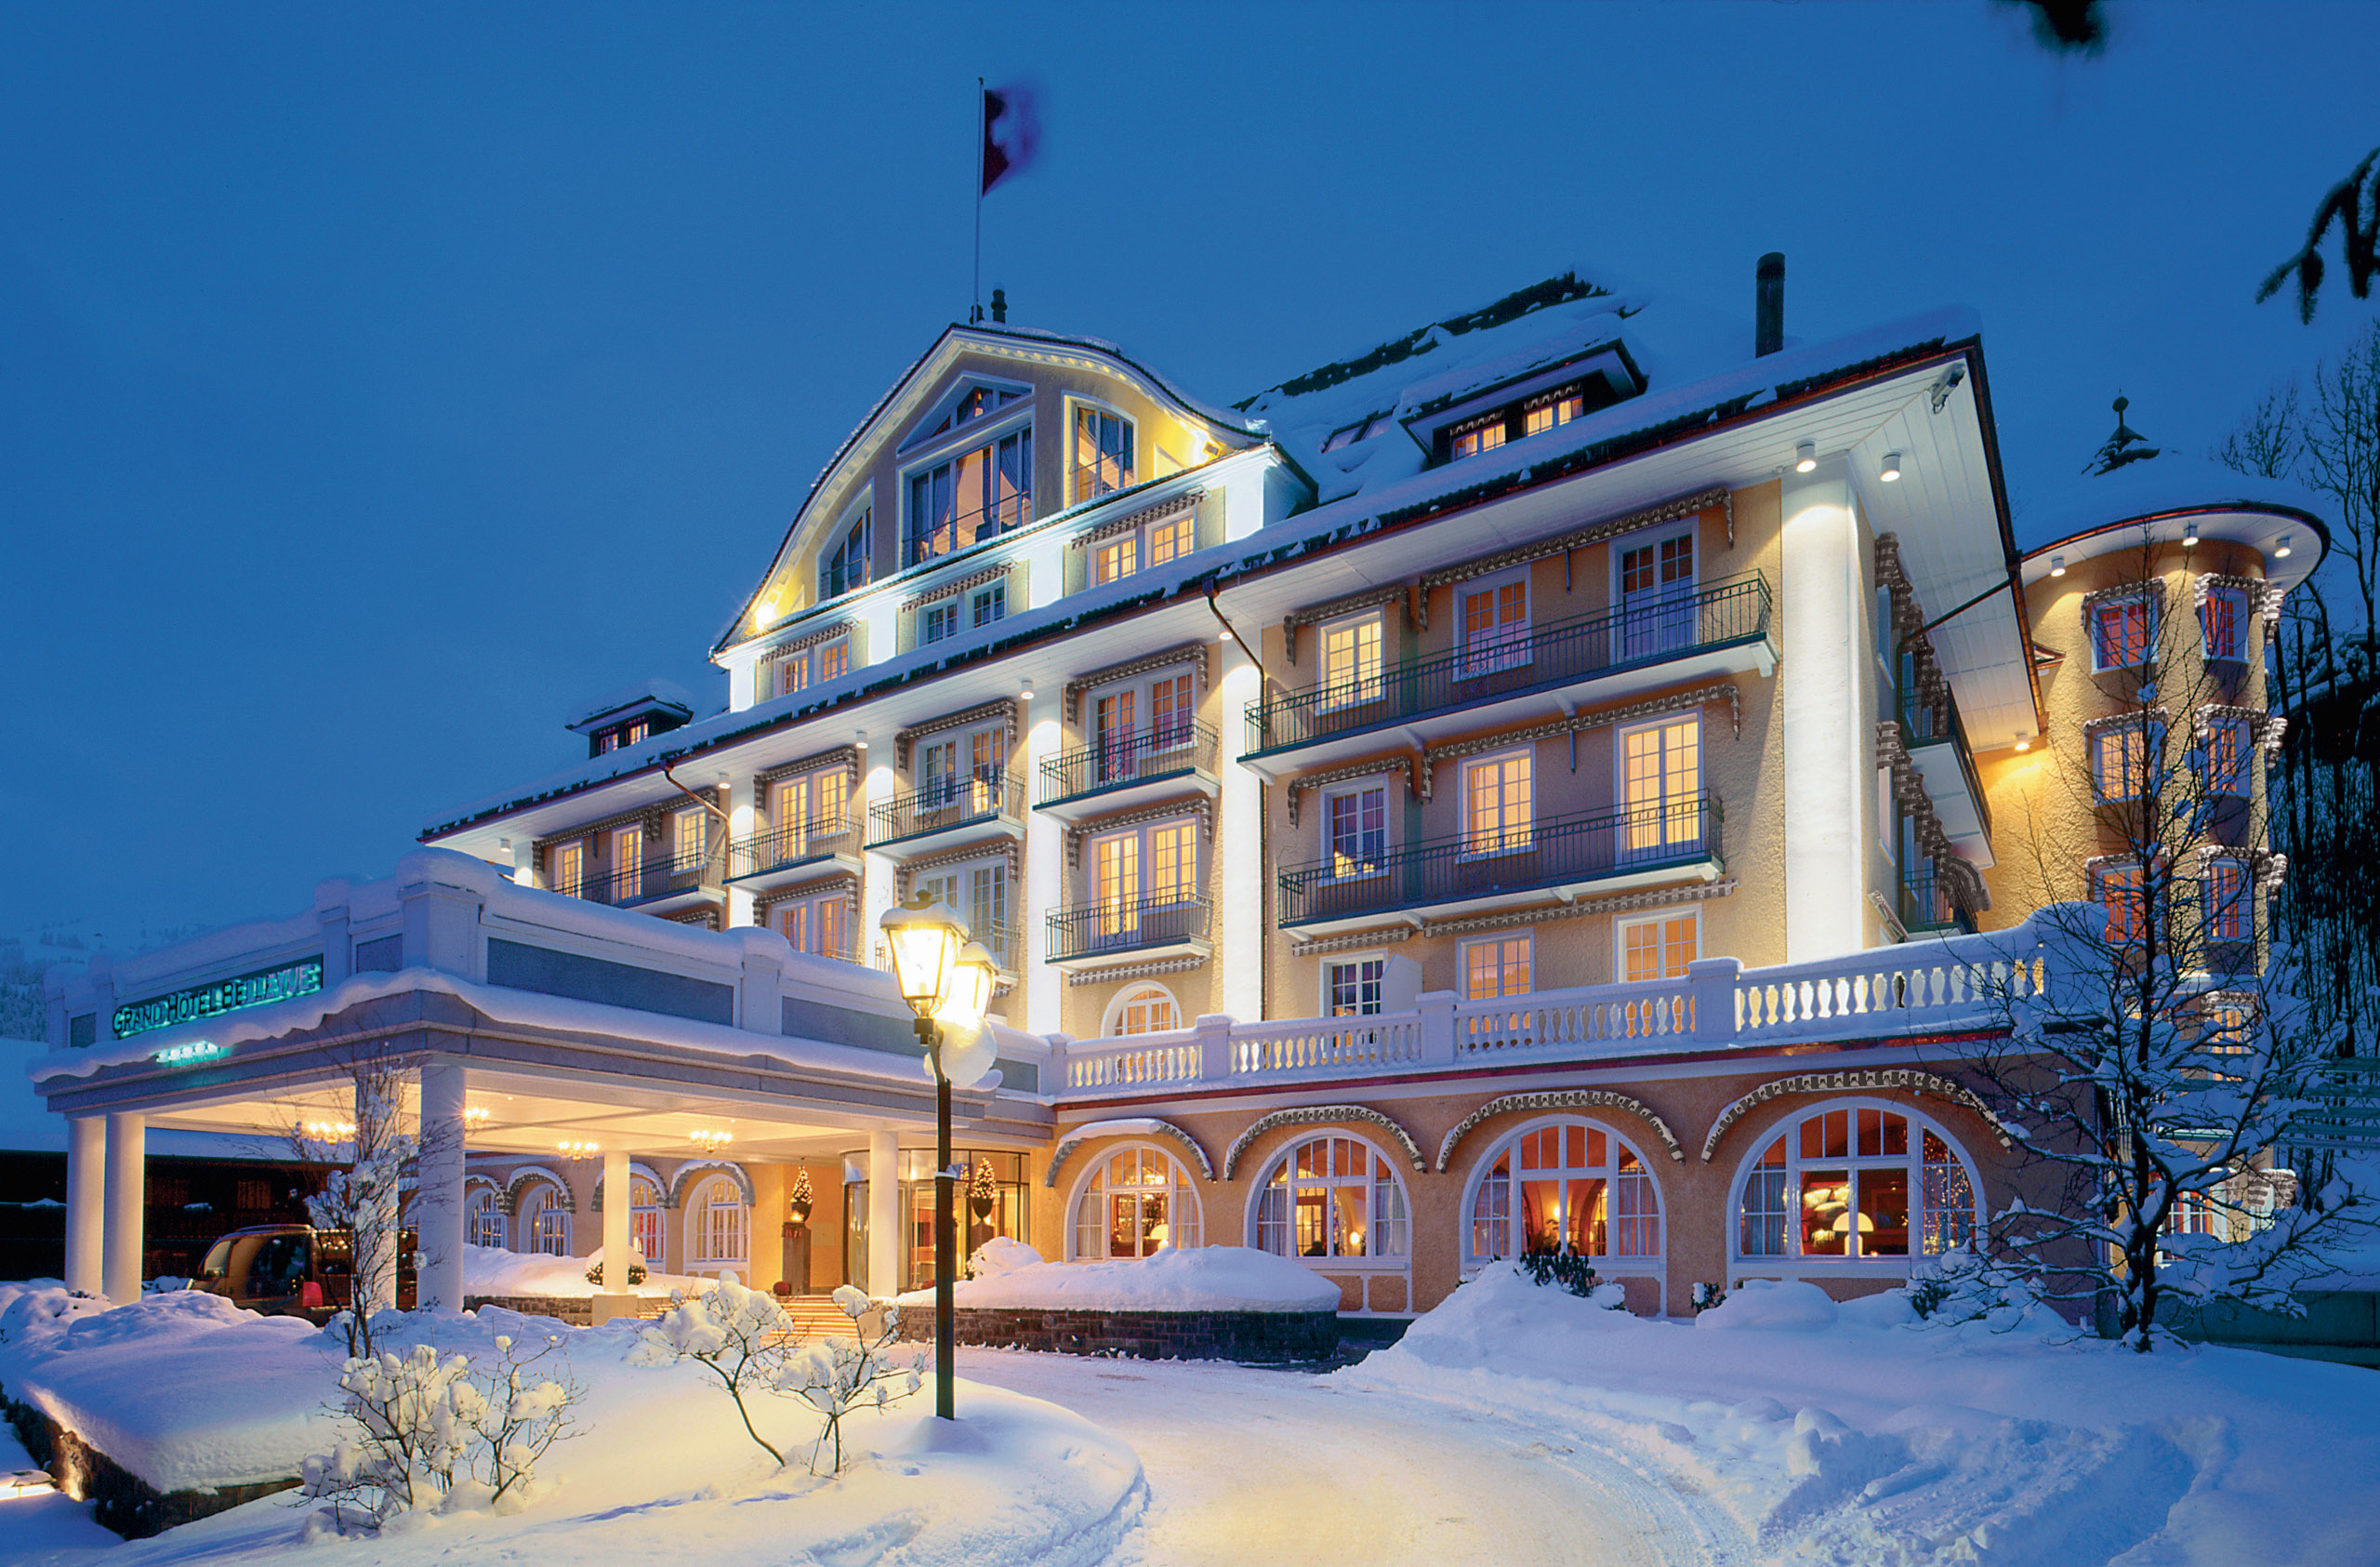 Le Grand Bellevue Hotel Gstaad Bellevue Covered In Snow